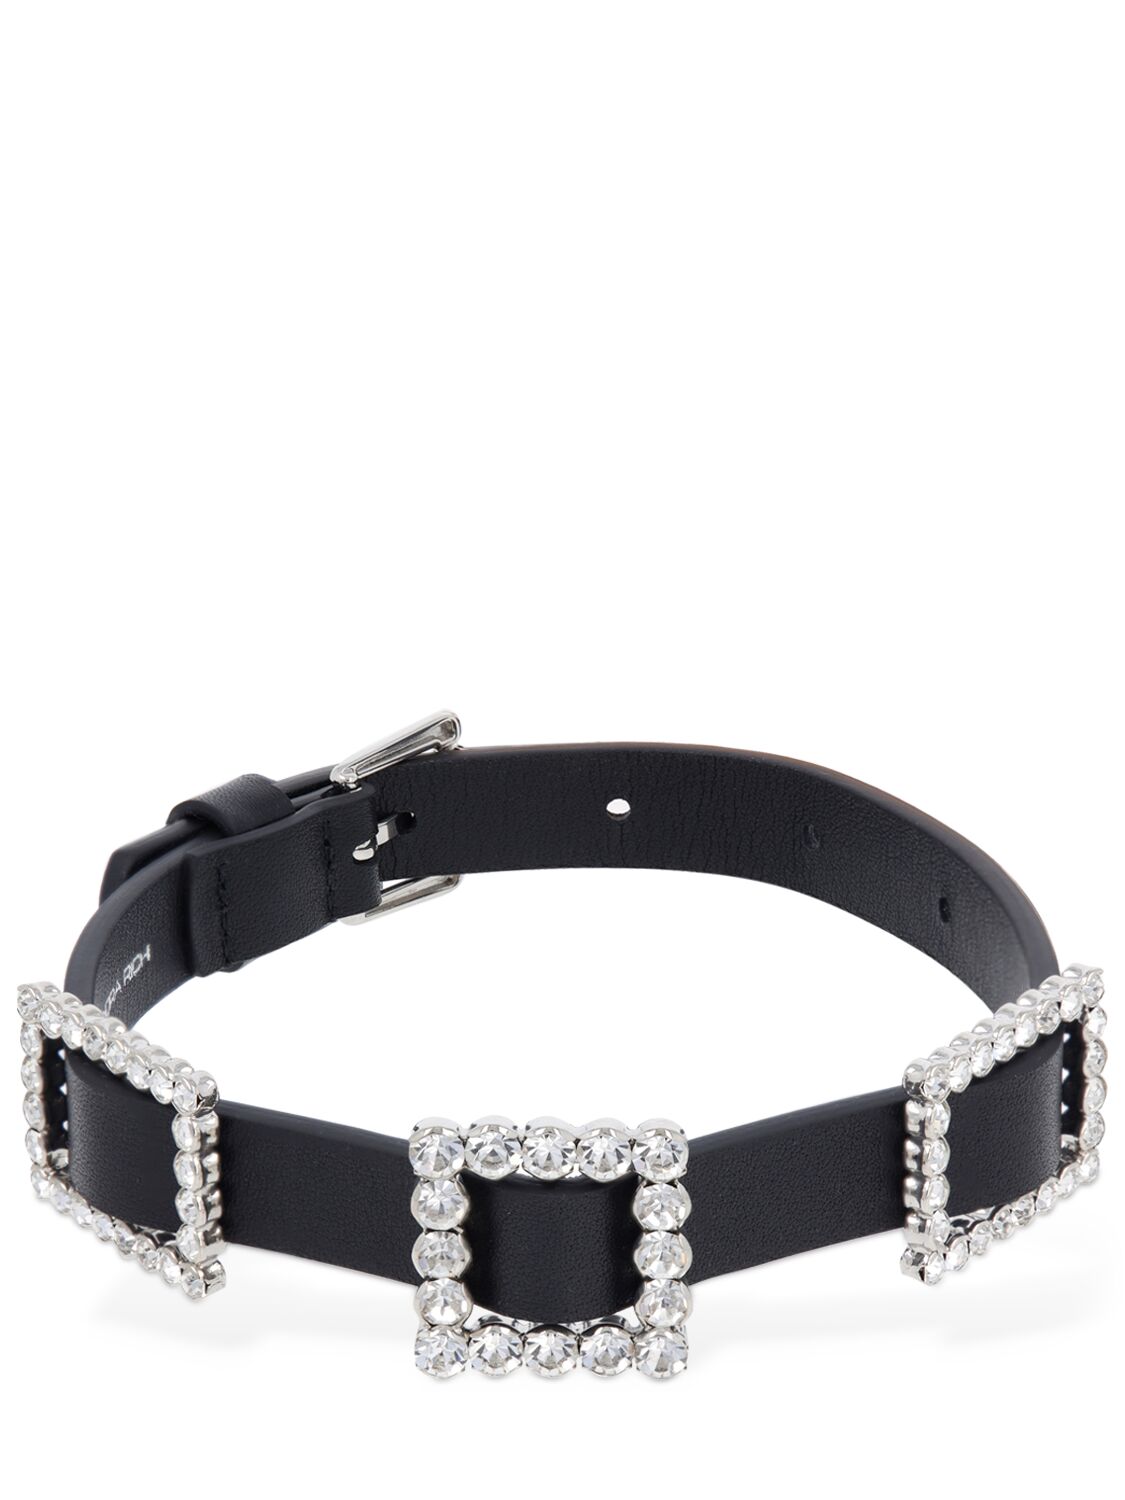 Leather Choker W/ Crystal Buckles